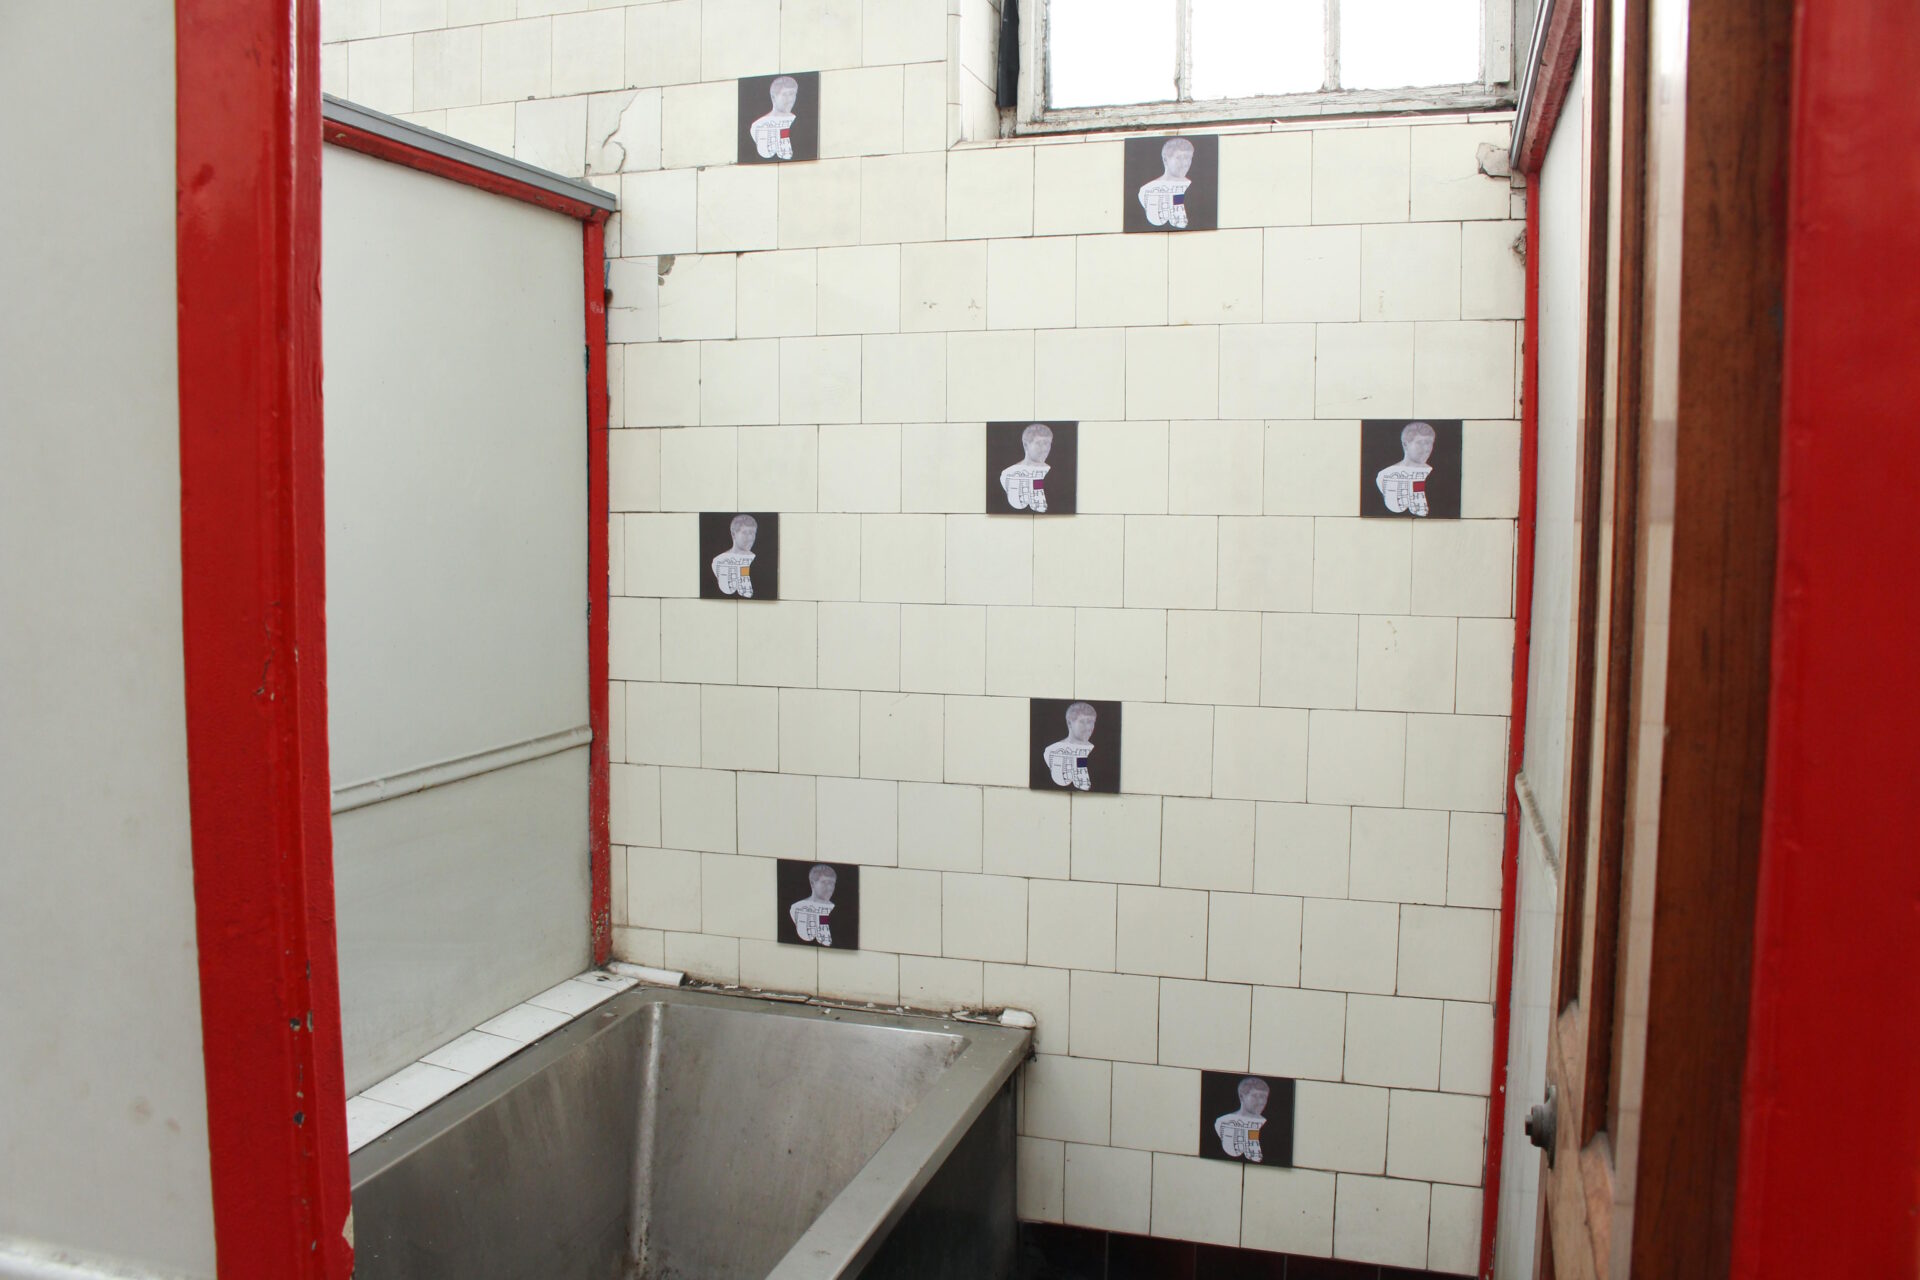 Eight digital tiles featuring Trajan are positioned randomly inside a red and cream swimming pool cubicle with a bath.